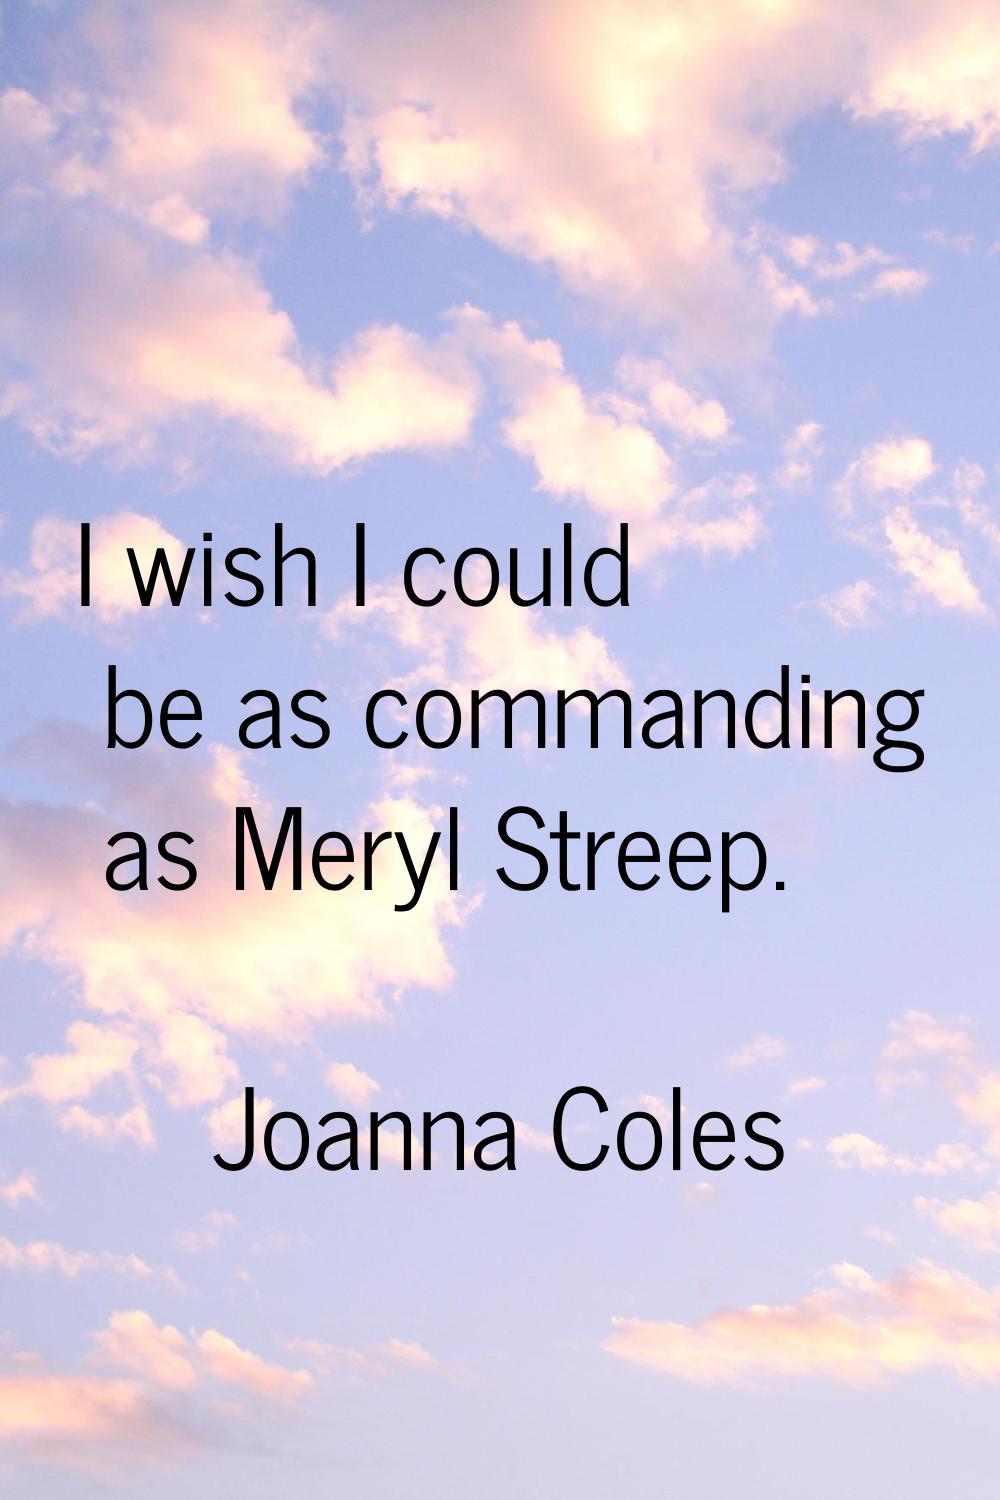 I wish I could be as commanding as Meryl Streep.